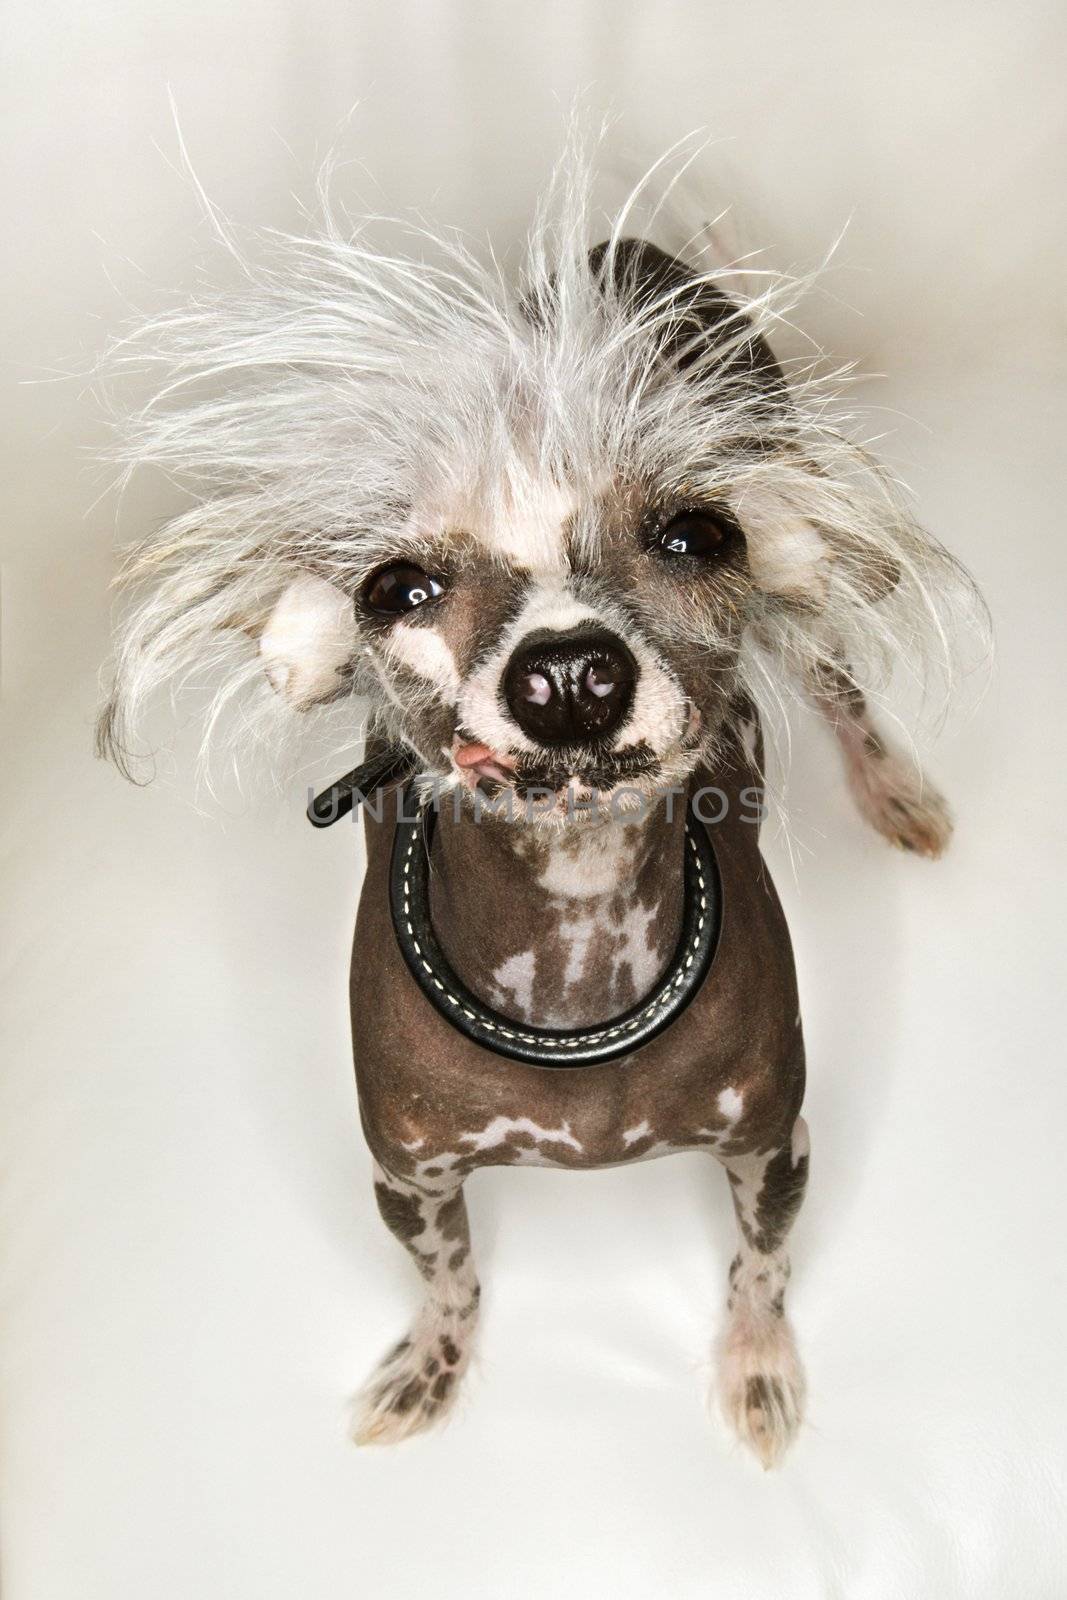 Chinese Crested dog portrait. by iofoto